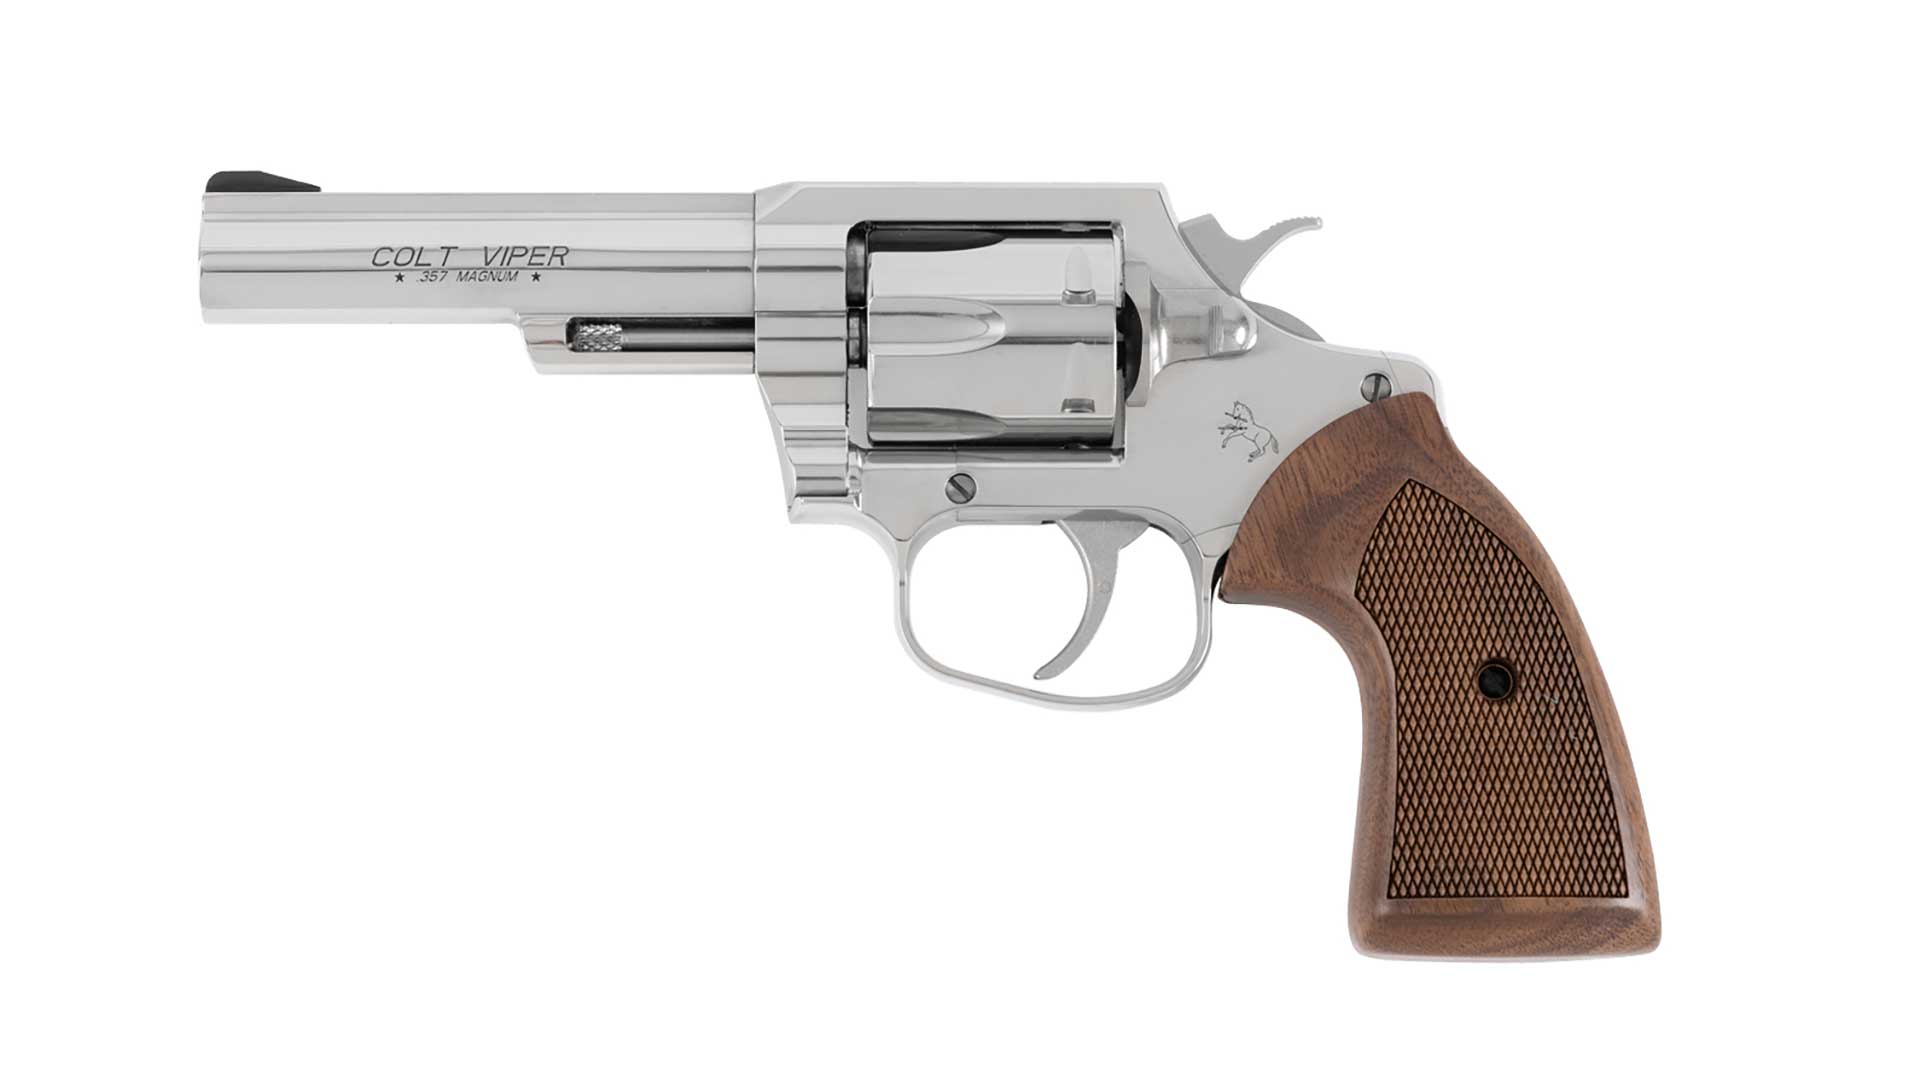 Left side of the Colt Viper stainless-steel revolver with a 4.25 inch barrel and wood grips.